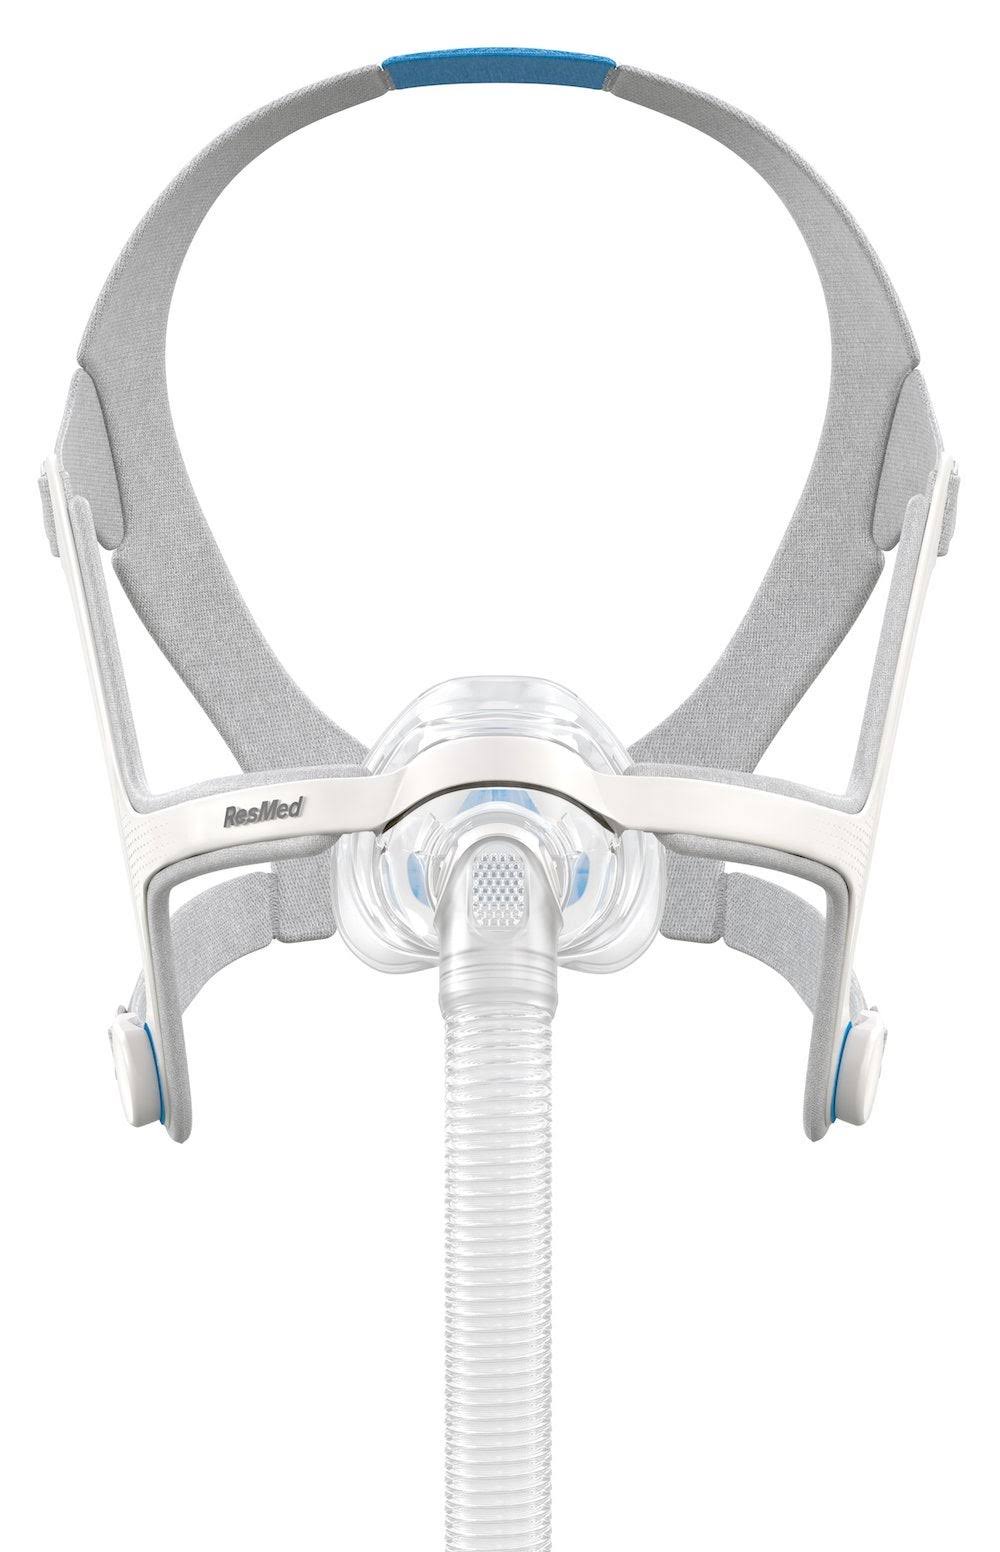 ResMed AirFit N20 Nasal CPAP Mask with Headgear - Large